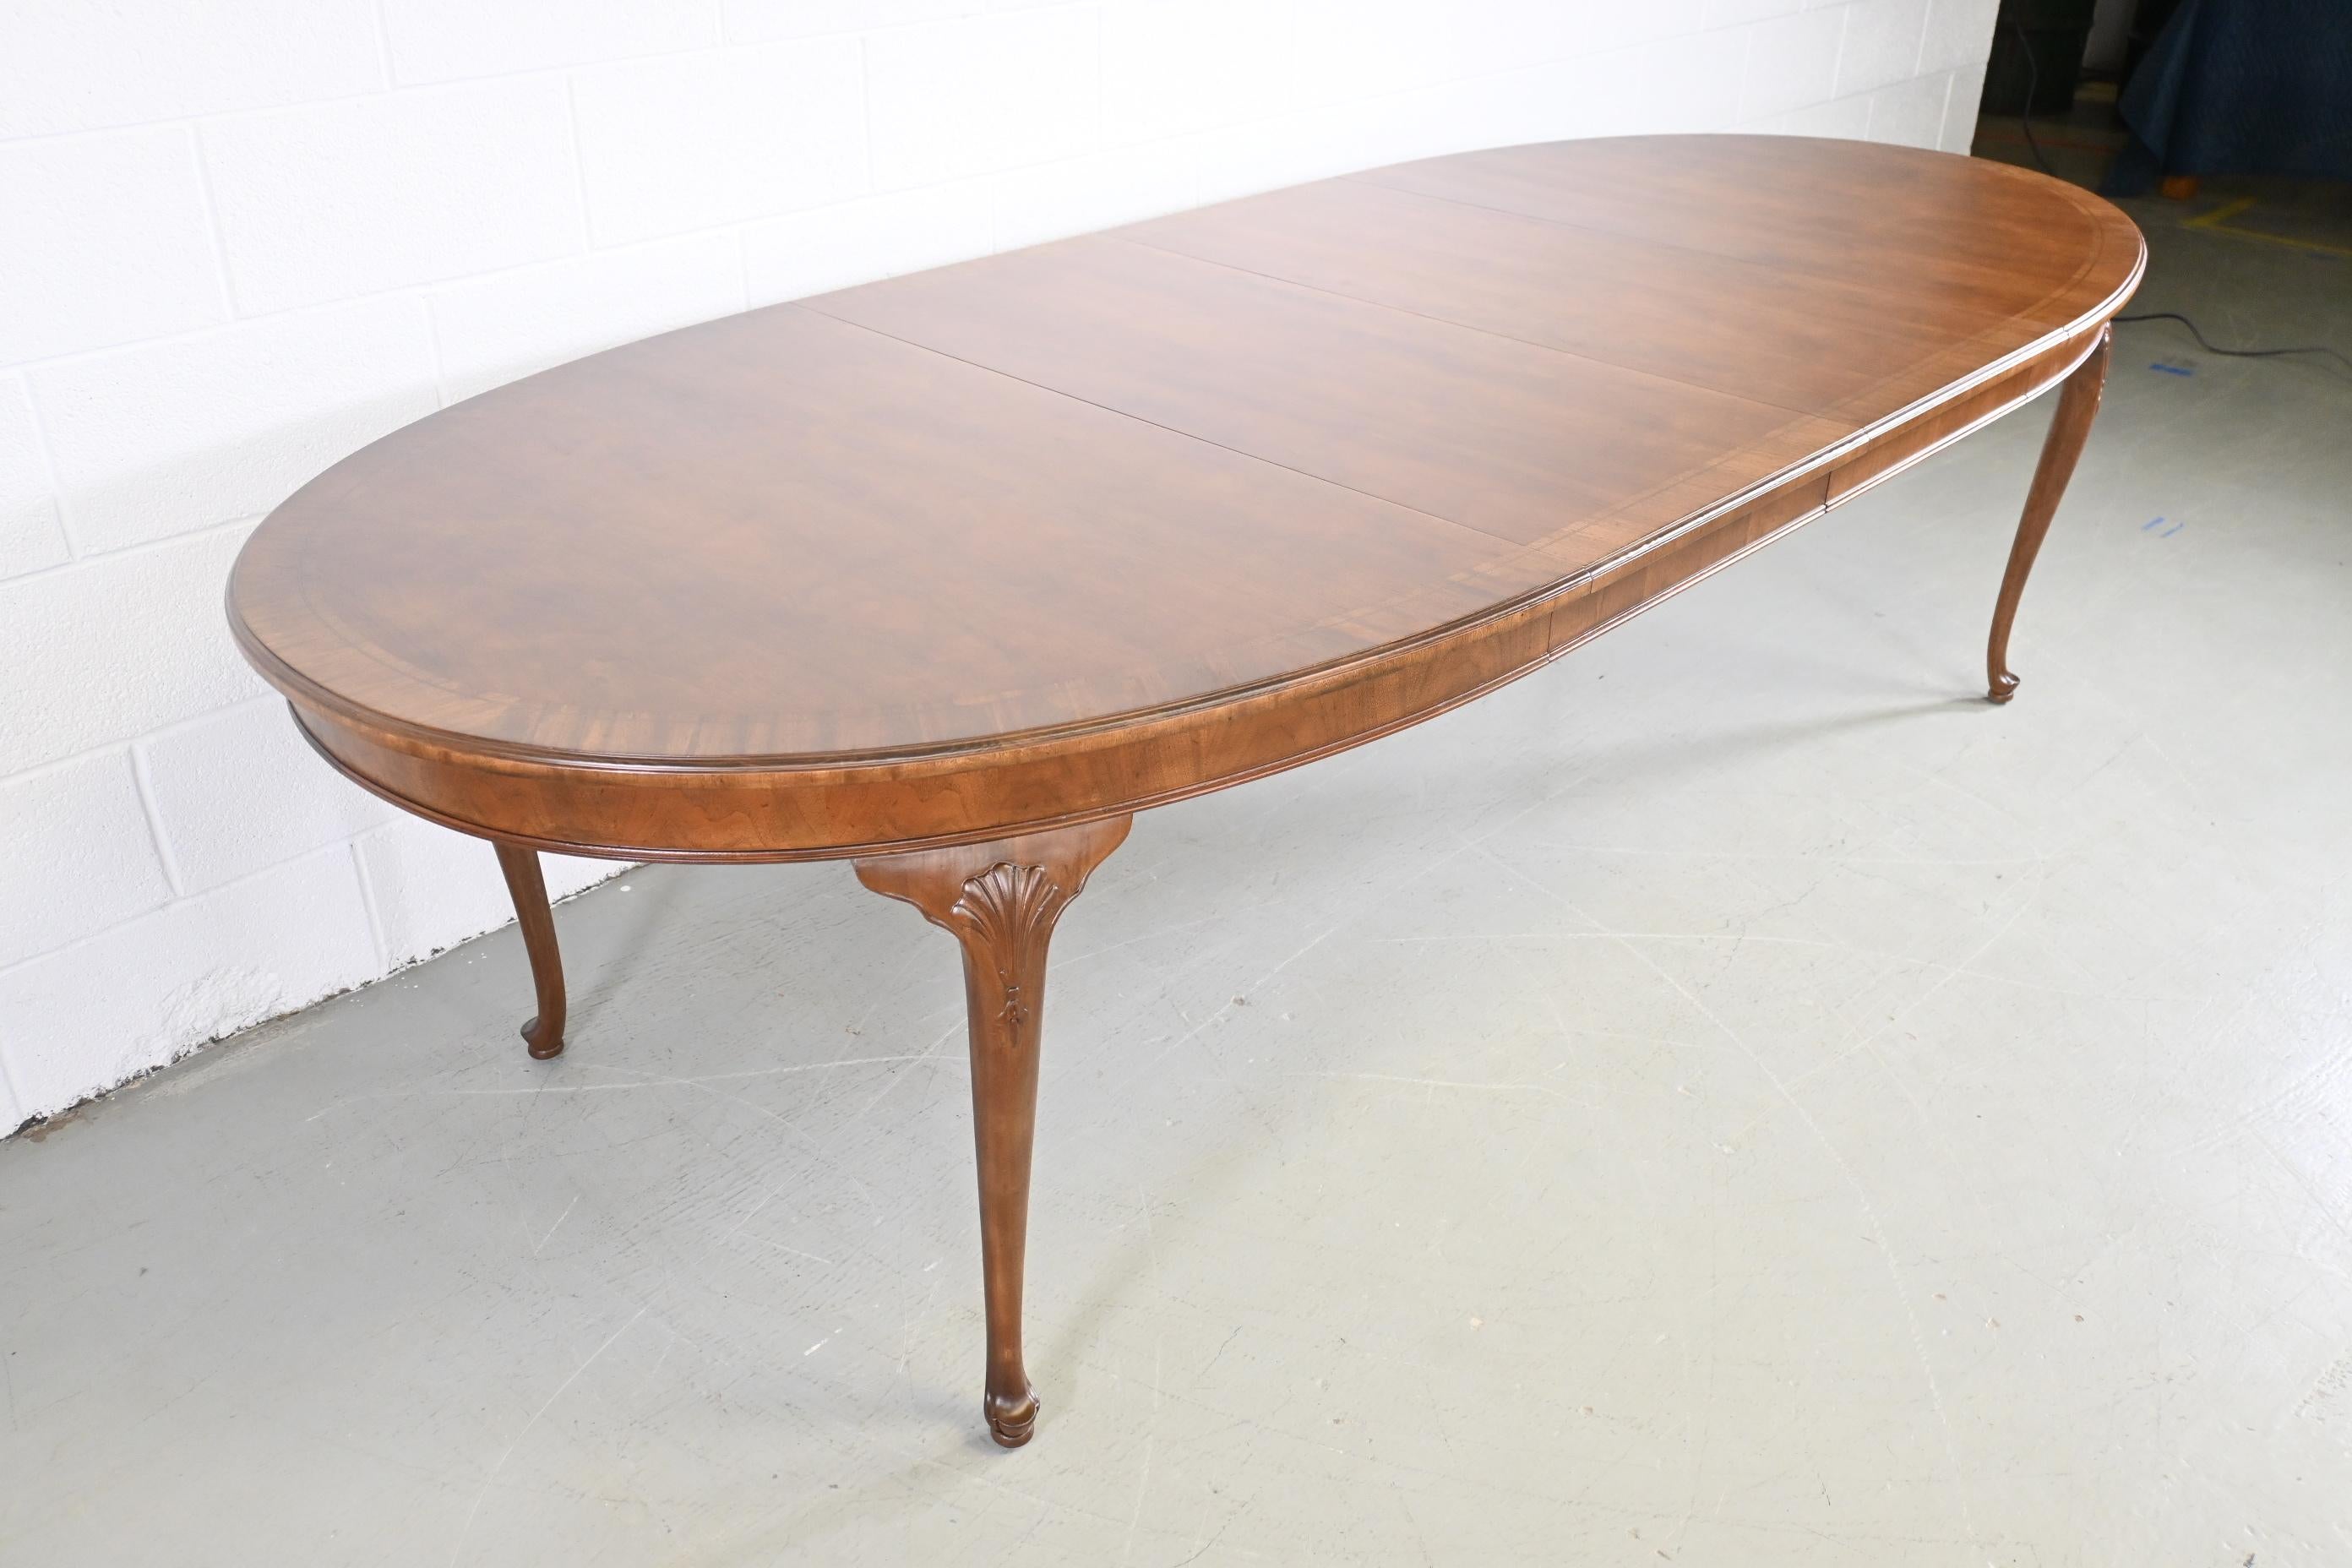 Henredon Furniture French Queen Anne Style Extension Dining Table

Henredon Furniture, USA, 1980s

68 Wide x 45 Deep x 29.25 High. Table extends up to 108